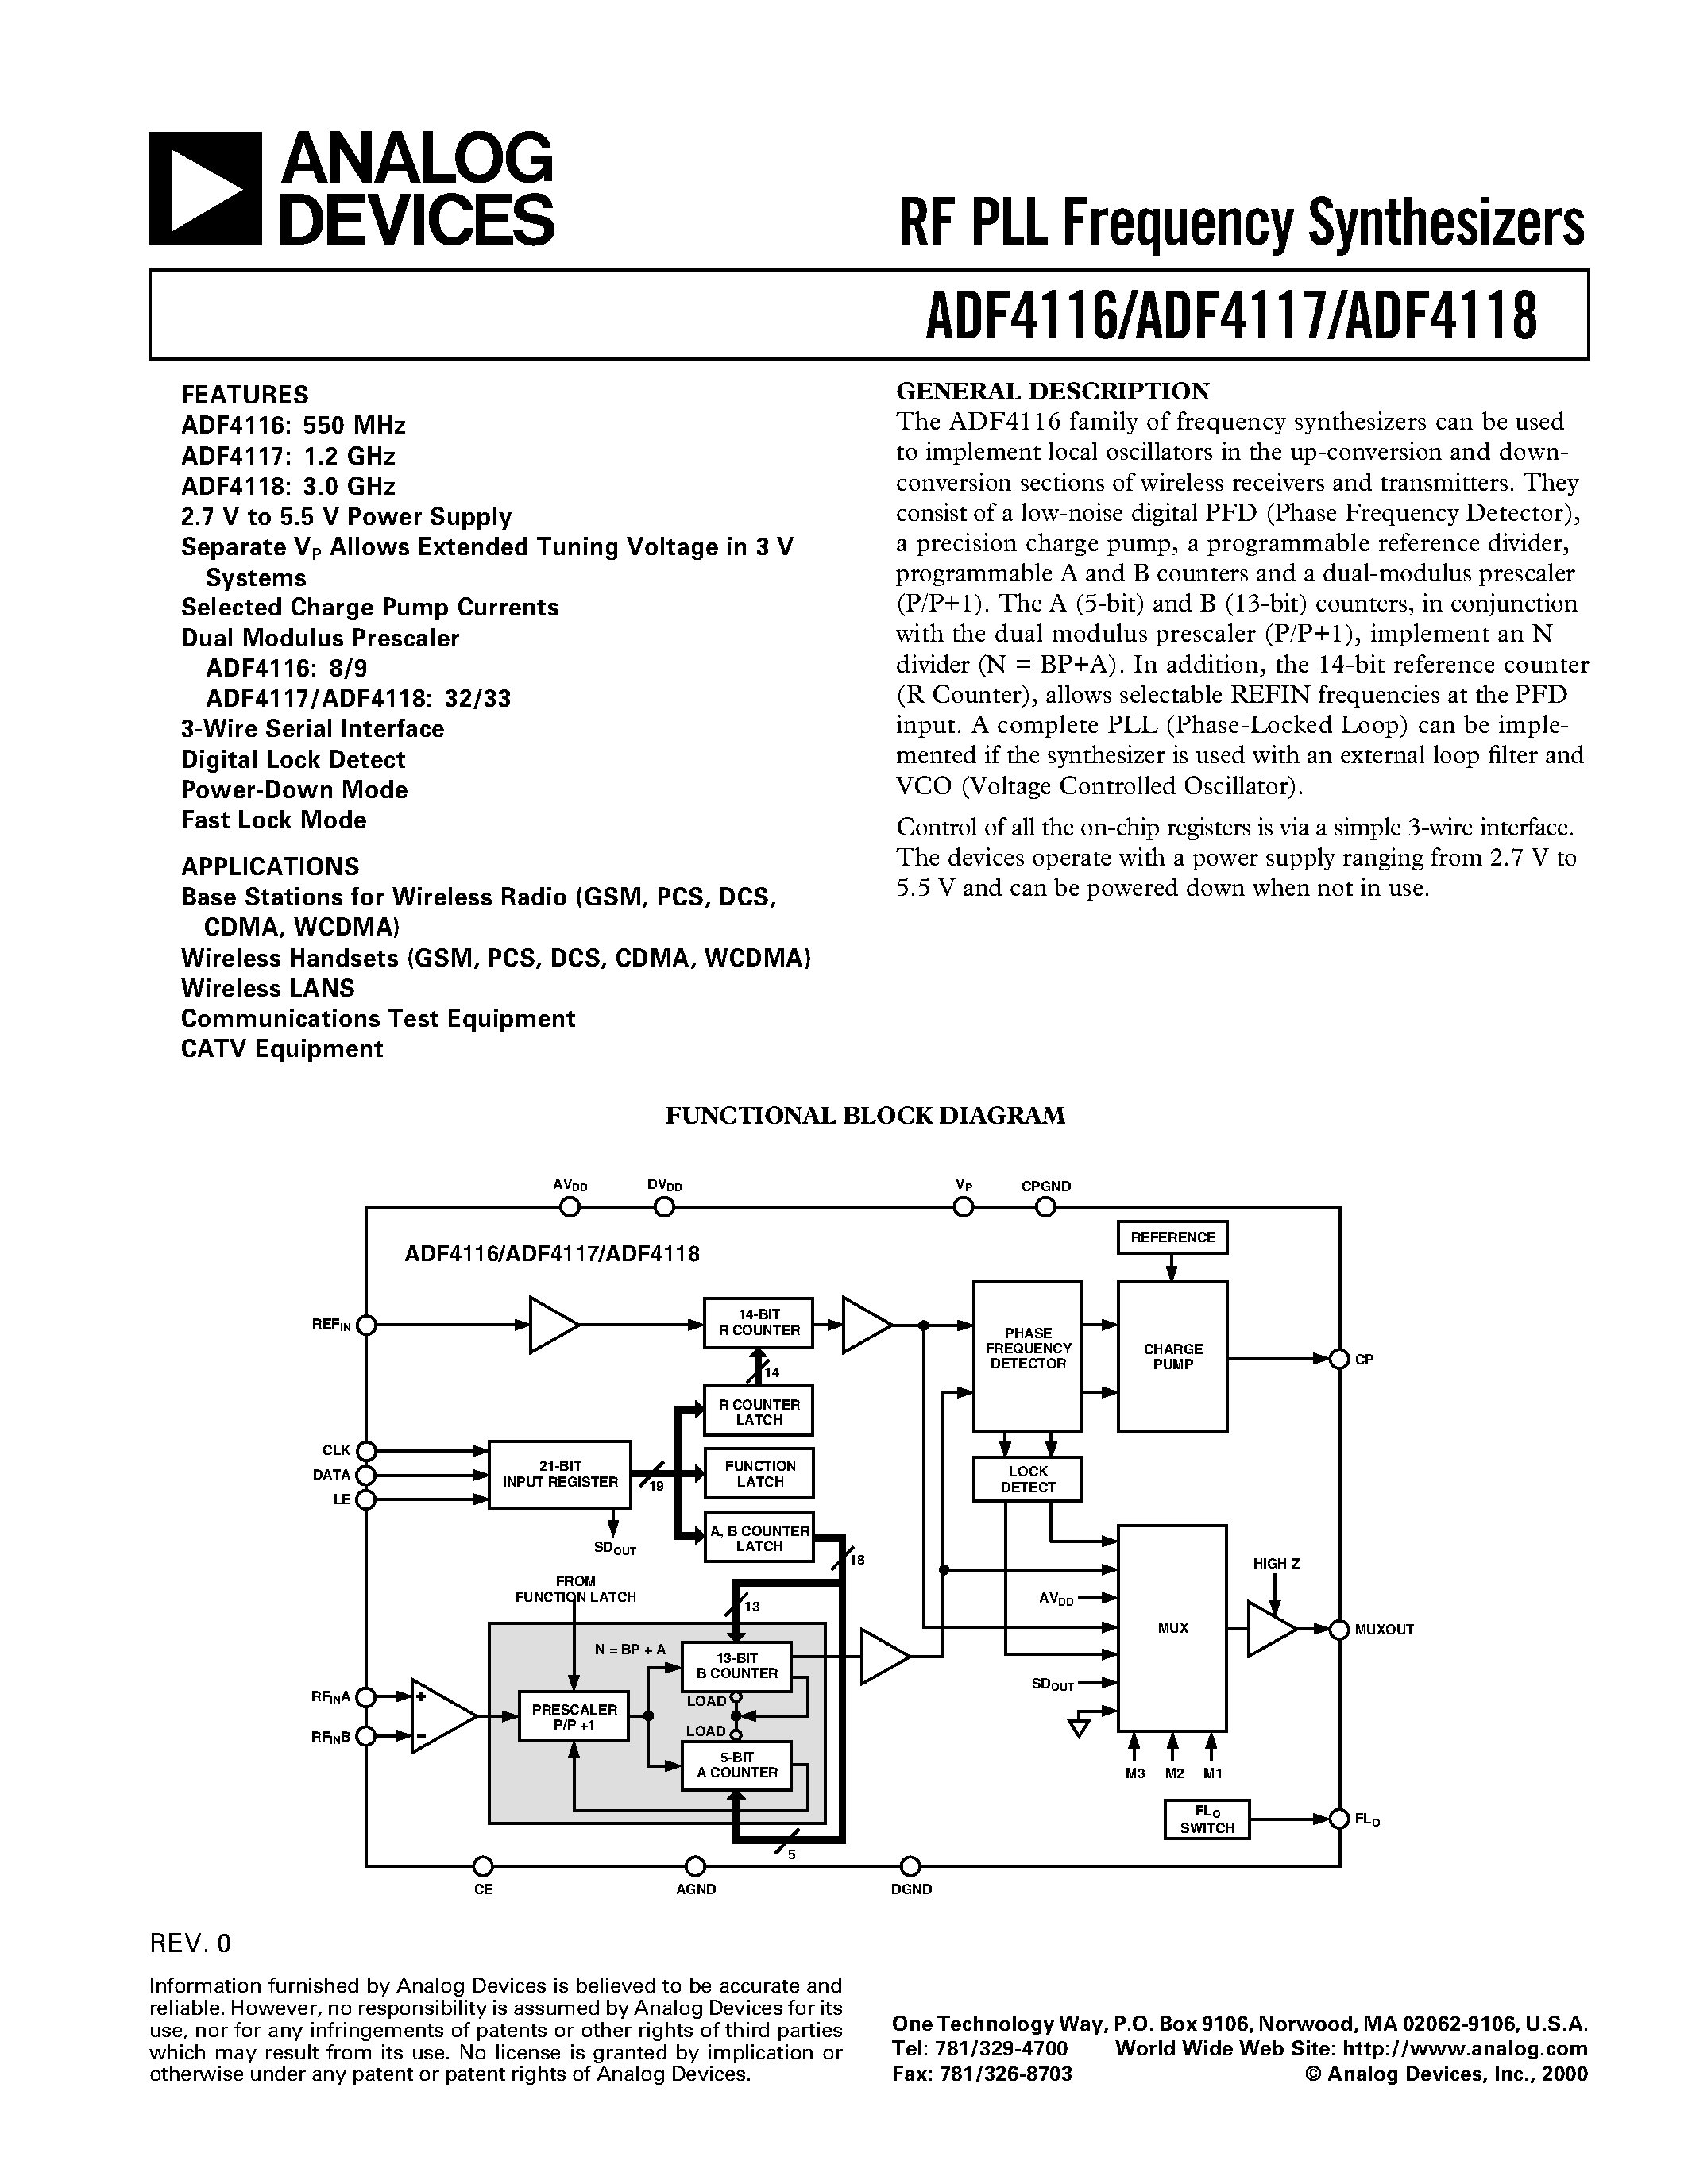 Даташит ADF4117 - RF PLL Frequency Synthesizers страница 1